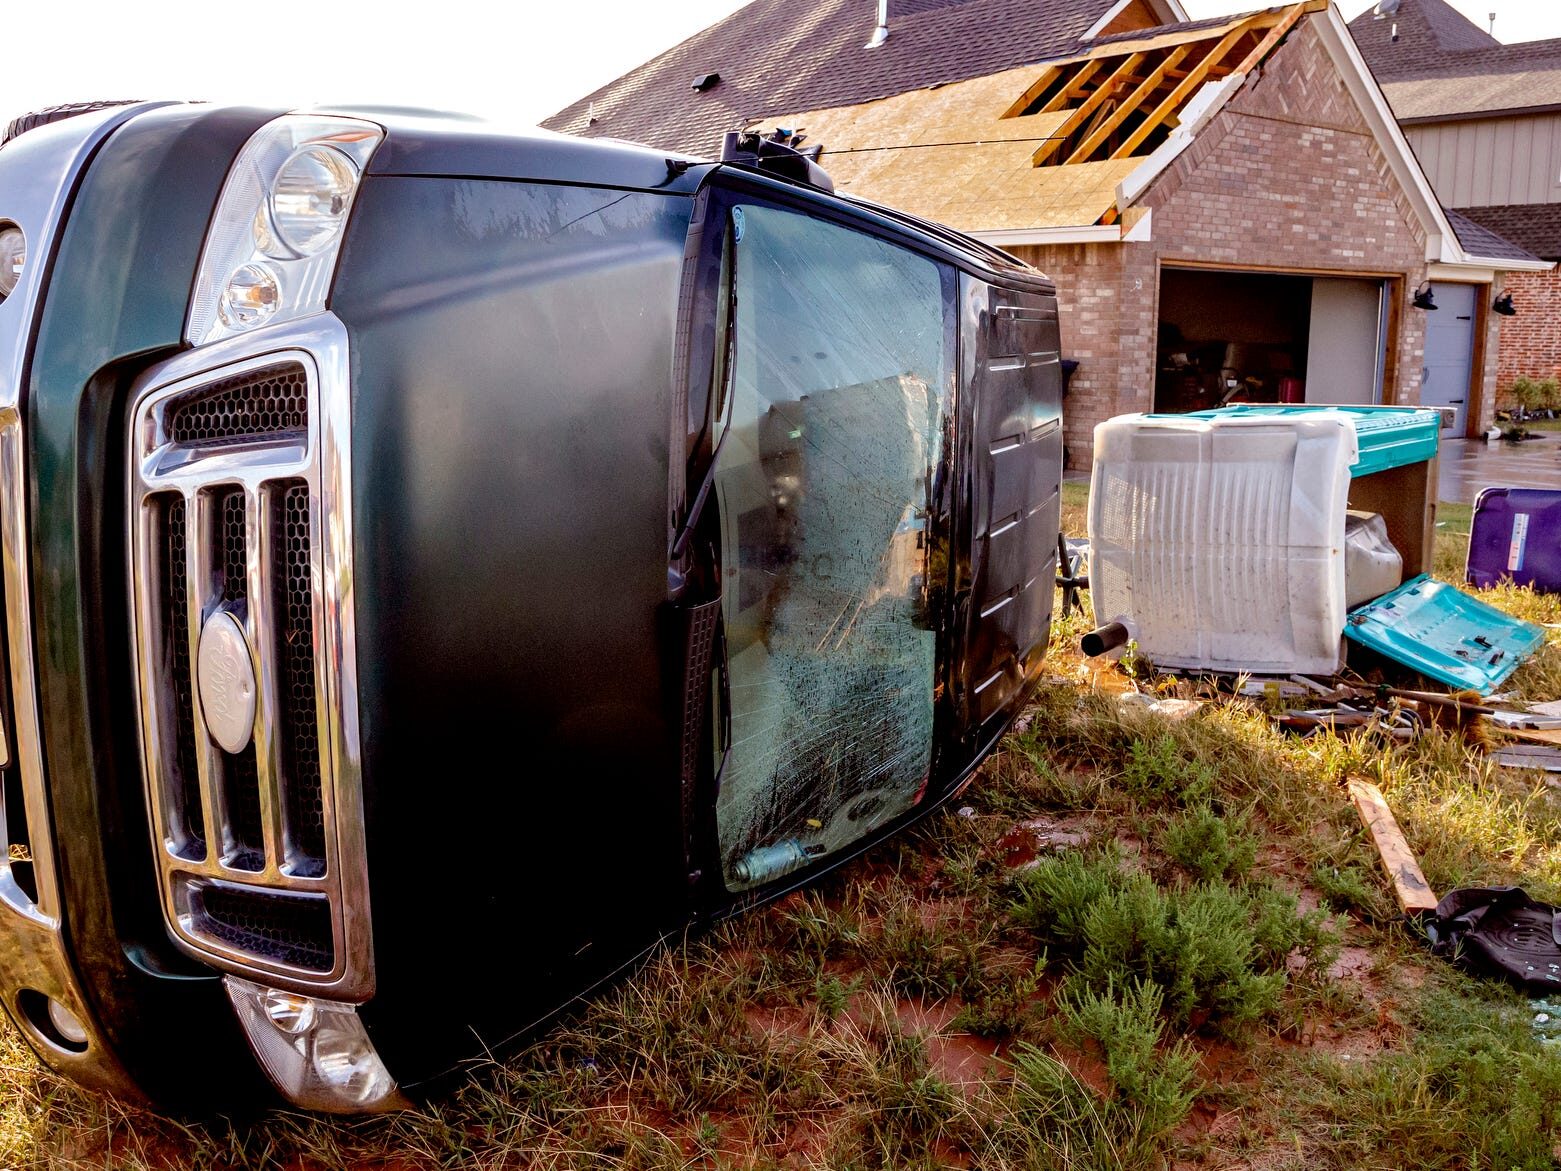 Storm damage to a home and an overturned truck caused by a tornado that hit in the early morning hours Wednesday near SW 49 and Czech Hall Road in Mustang.